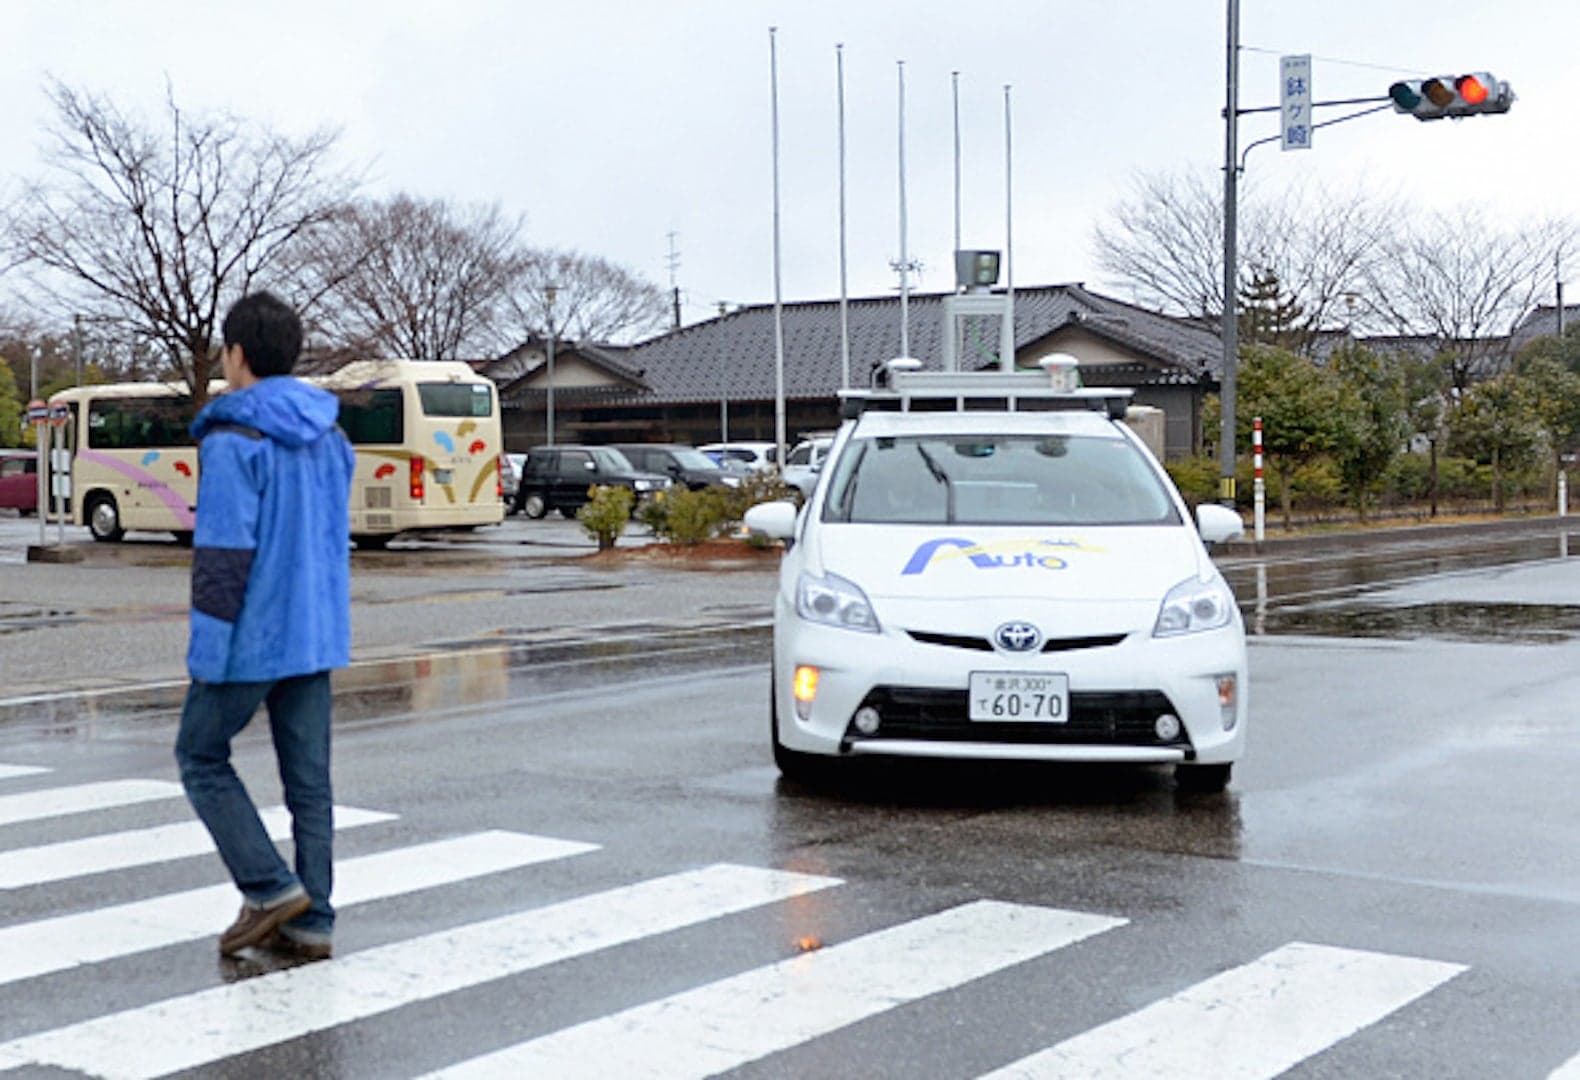 This Company is Working to Make Autonomous Cars Safer for Pedestrians